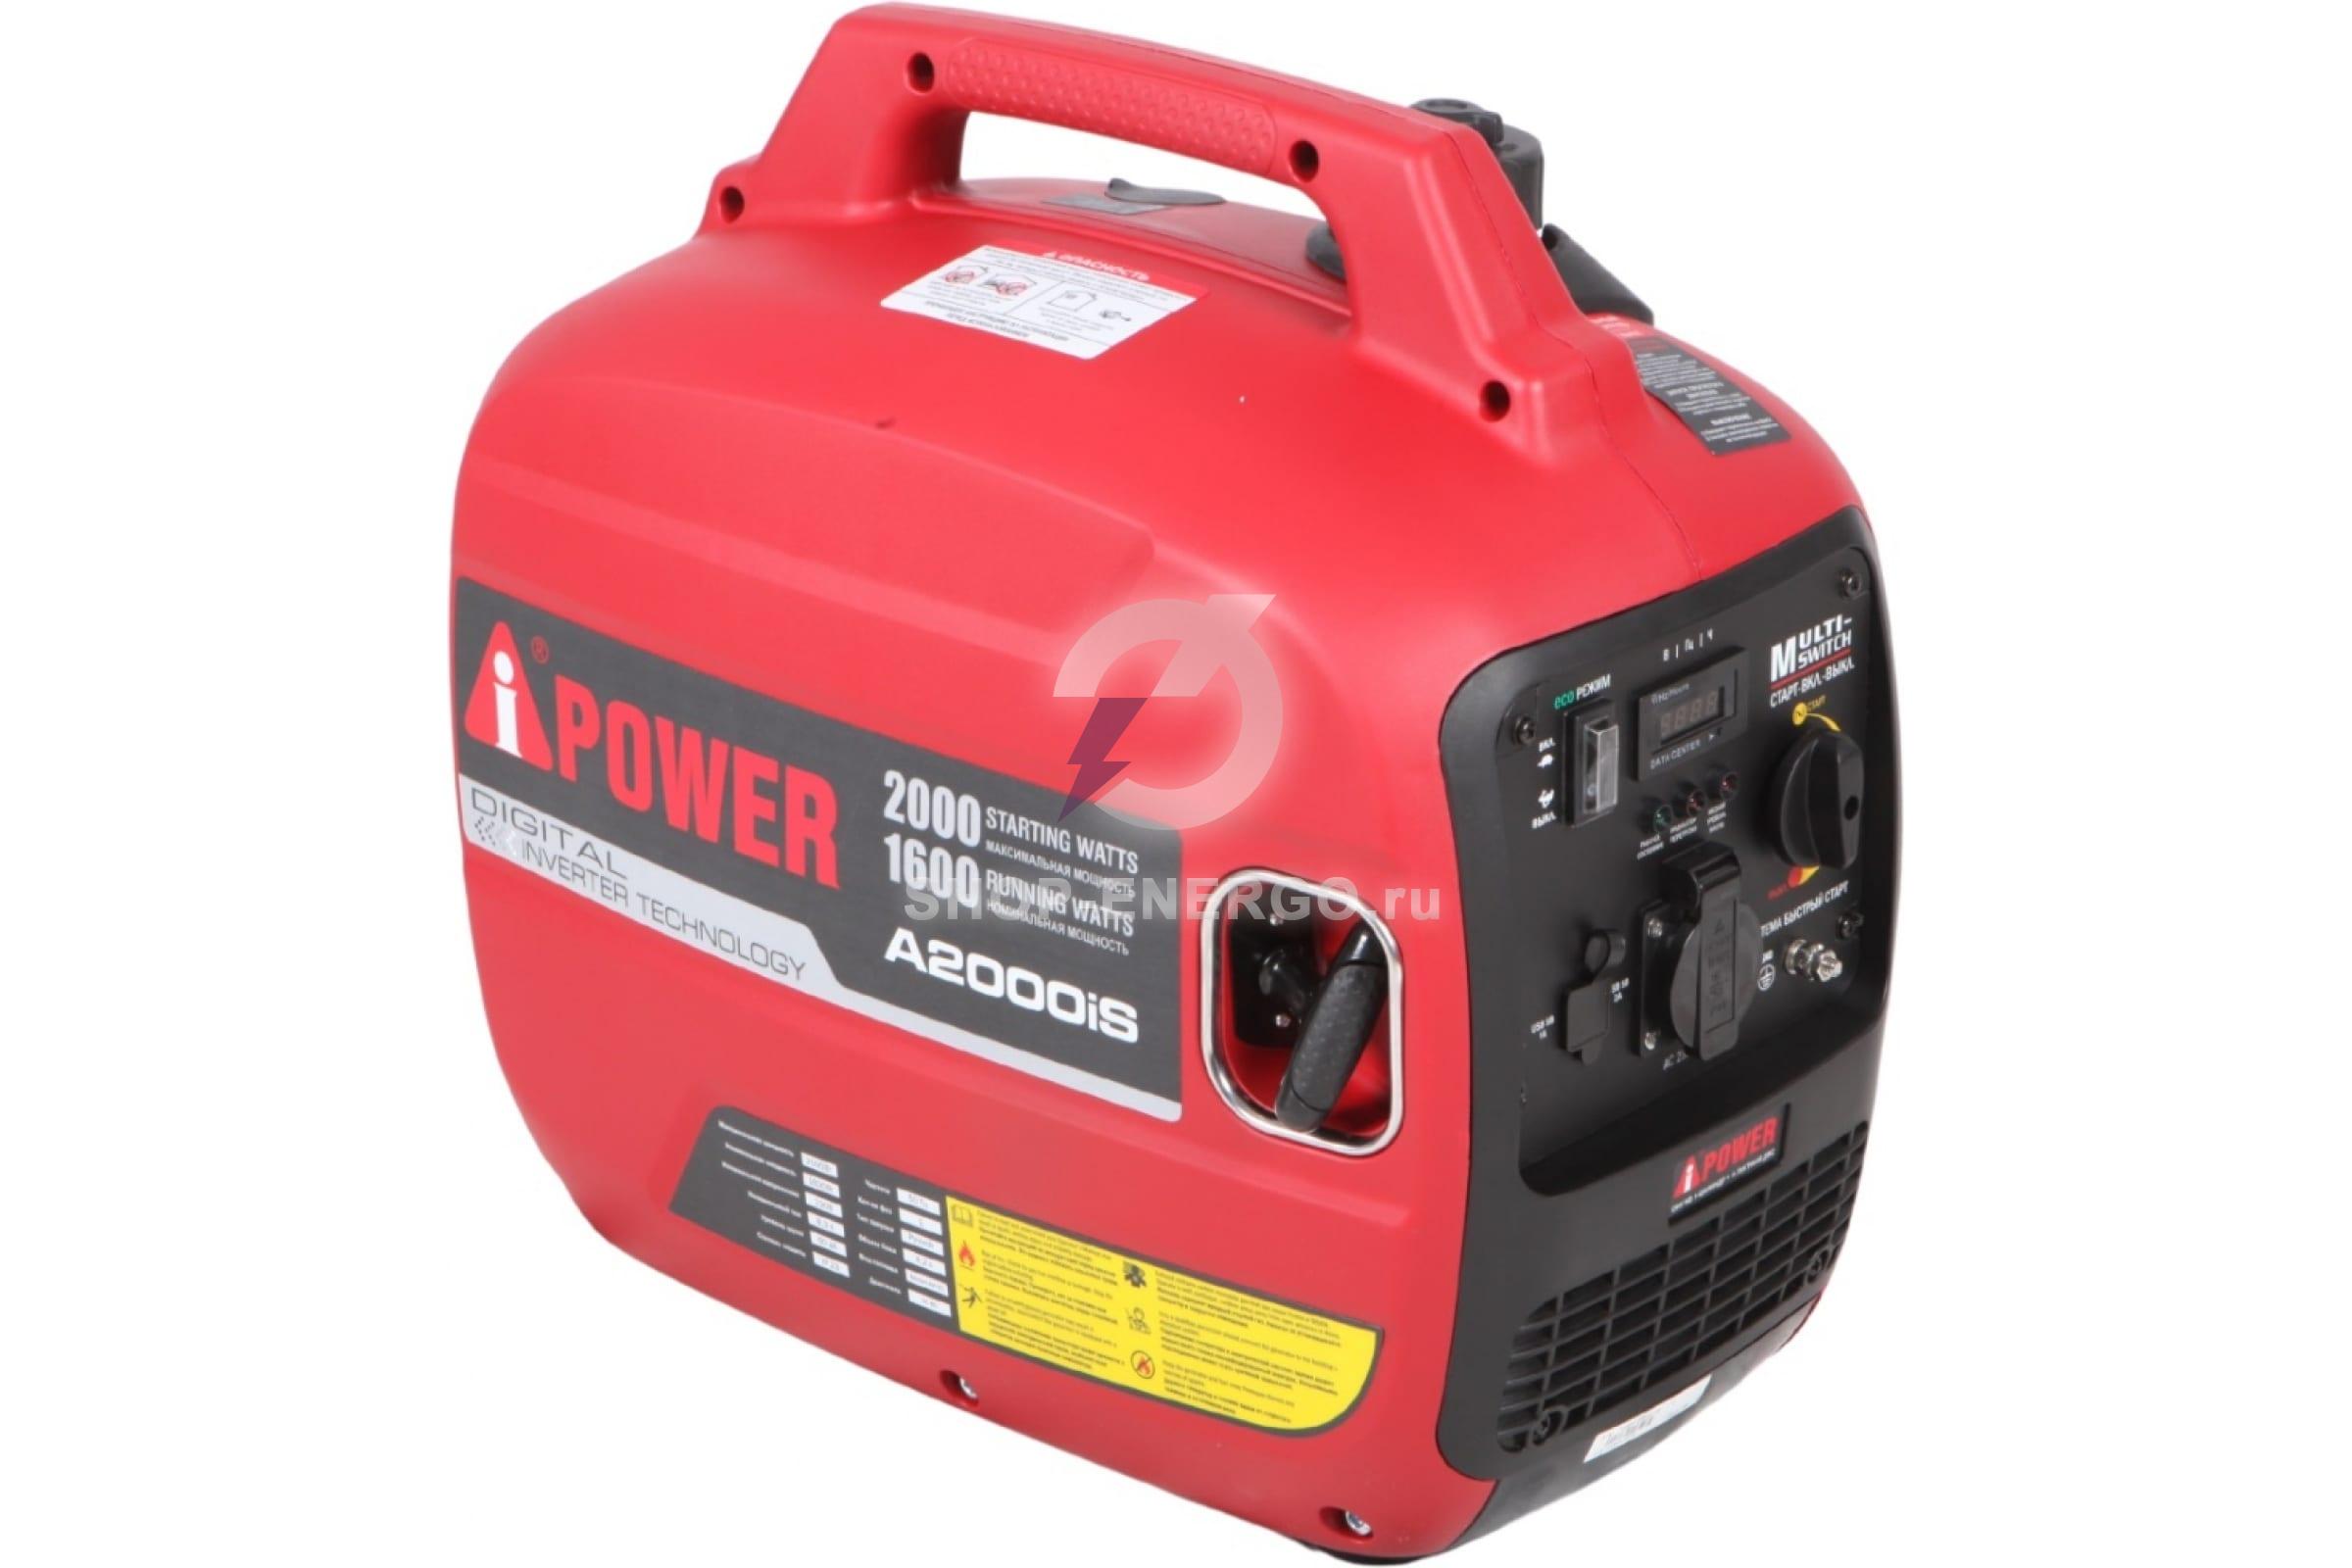   A-iPower A2000iS